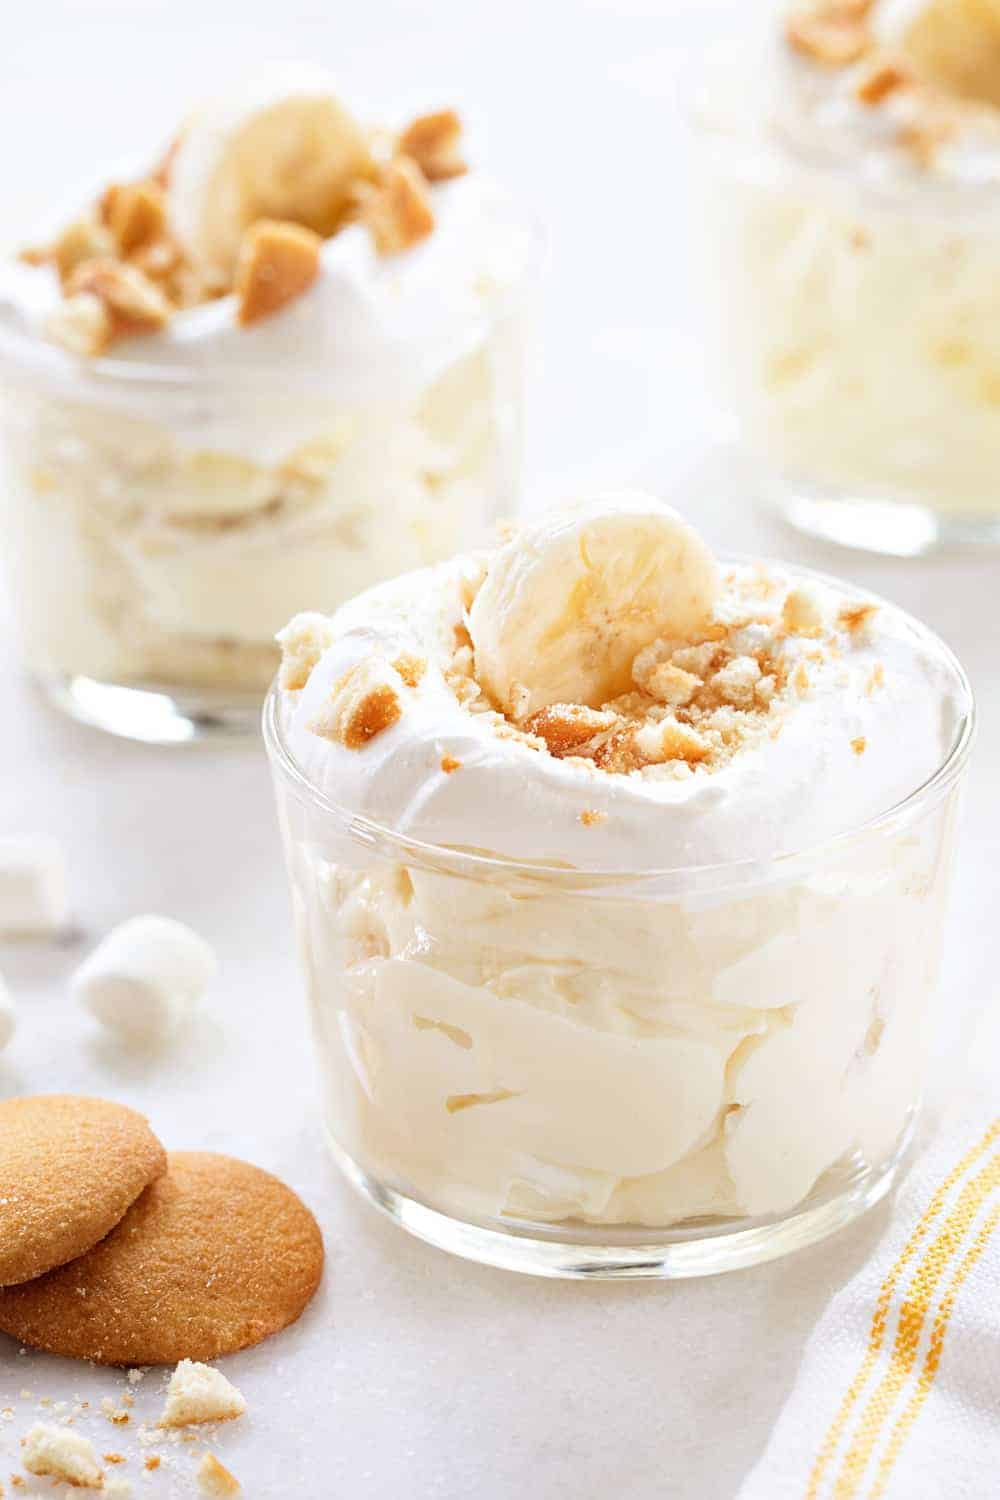 Banana Cream Pie Fluff is a new twist on a Southern classic. It's wonderful for potlucks and picnics, and way easier than pie!